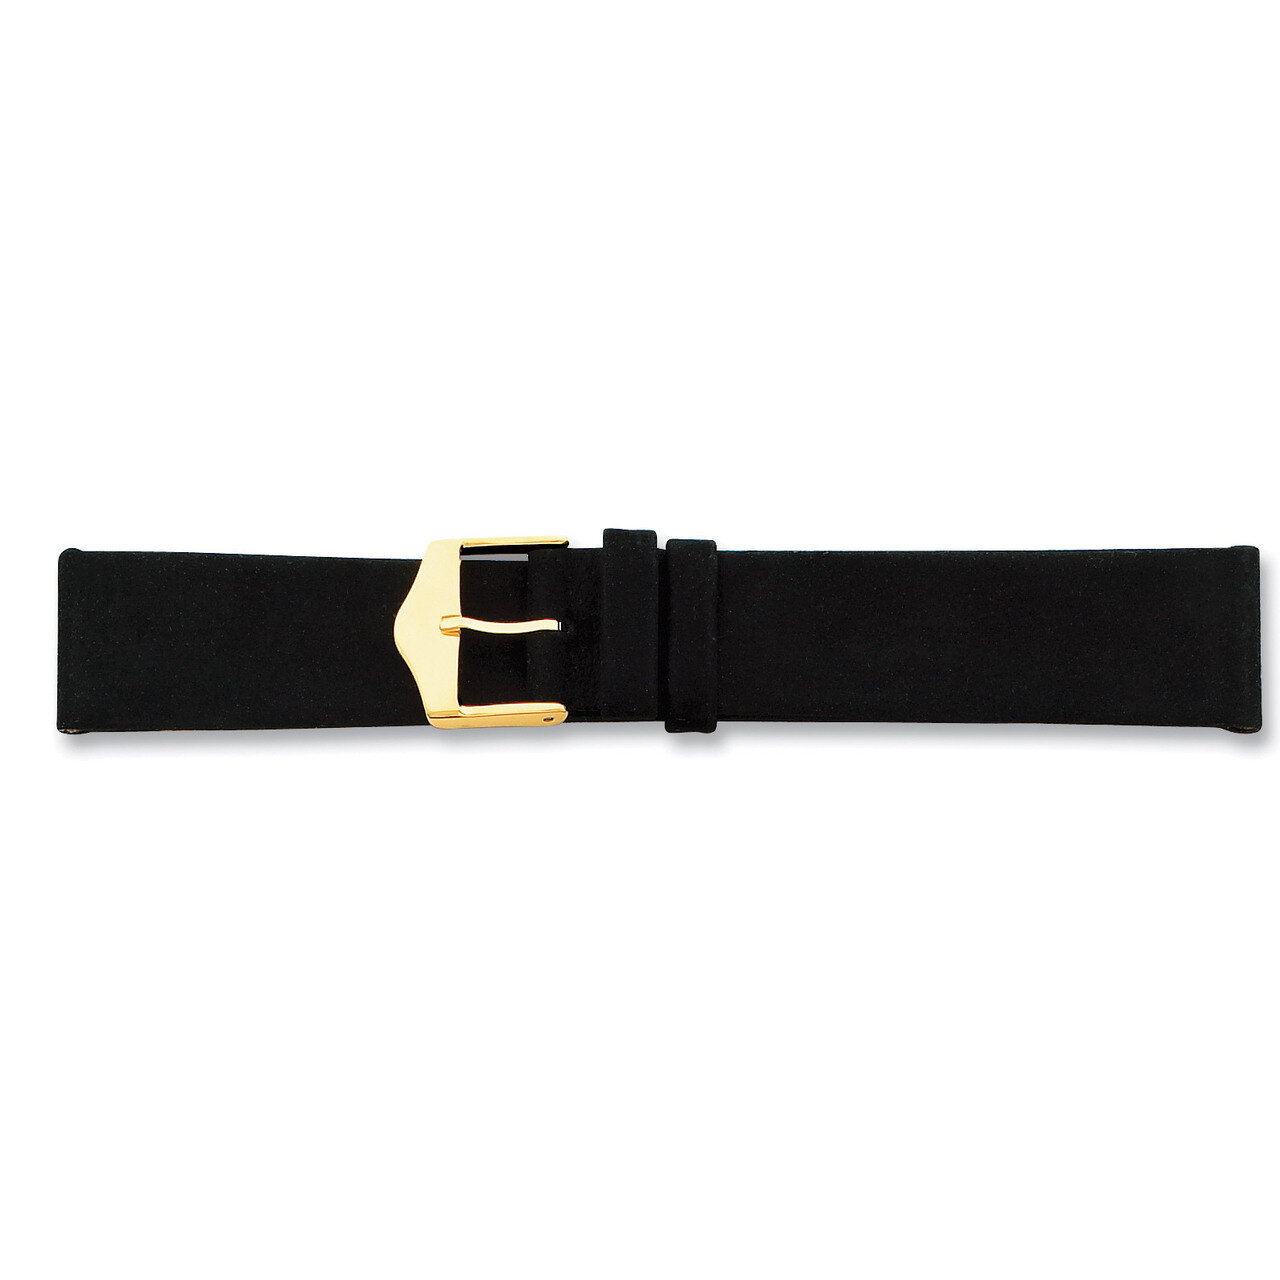 14mm Black Suede Leather Watch Band 6.75 Inch Silver-tone Buckle BAW120-14